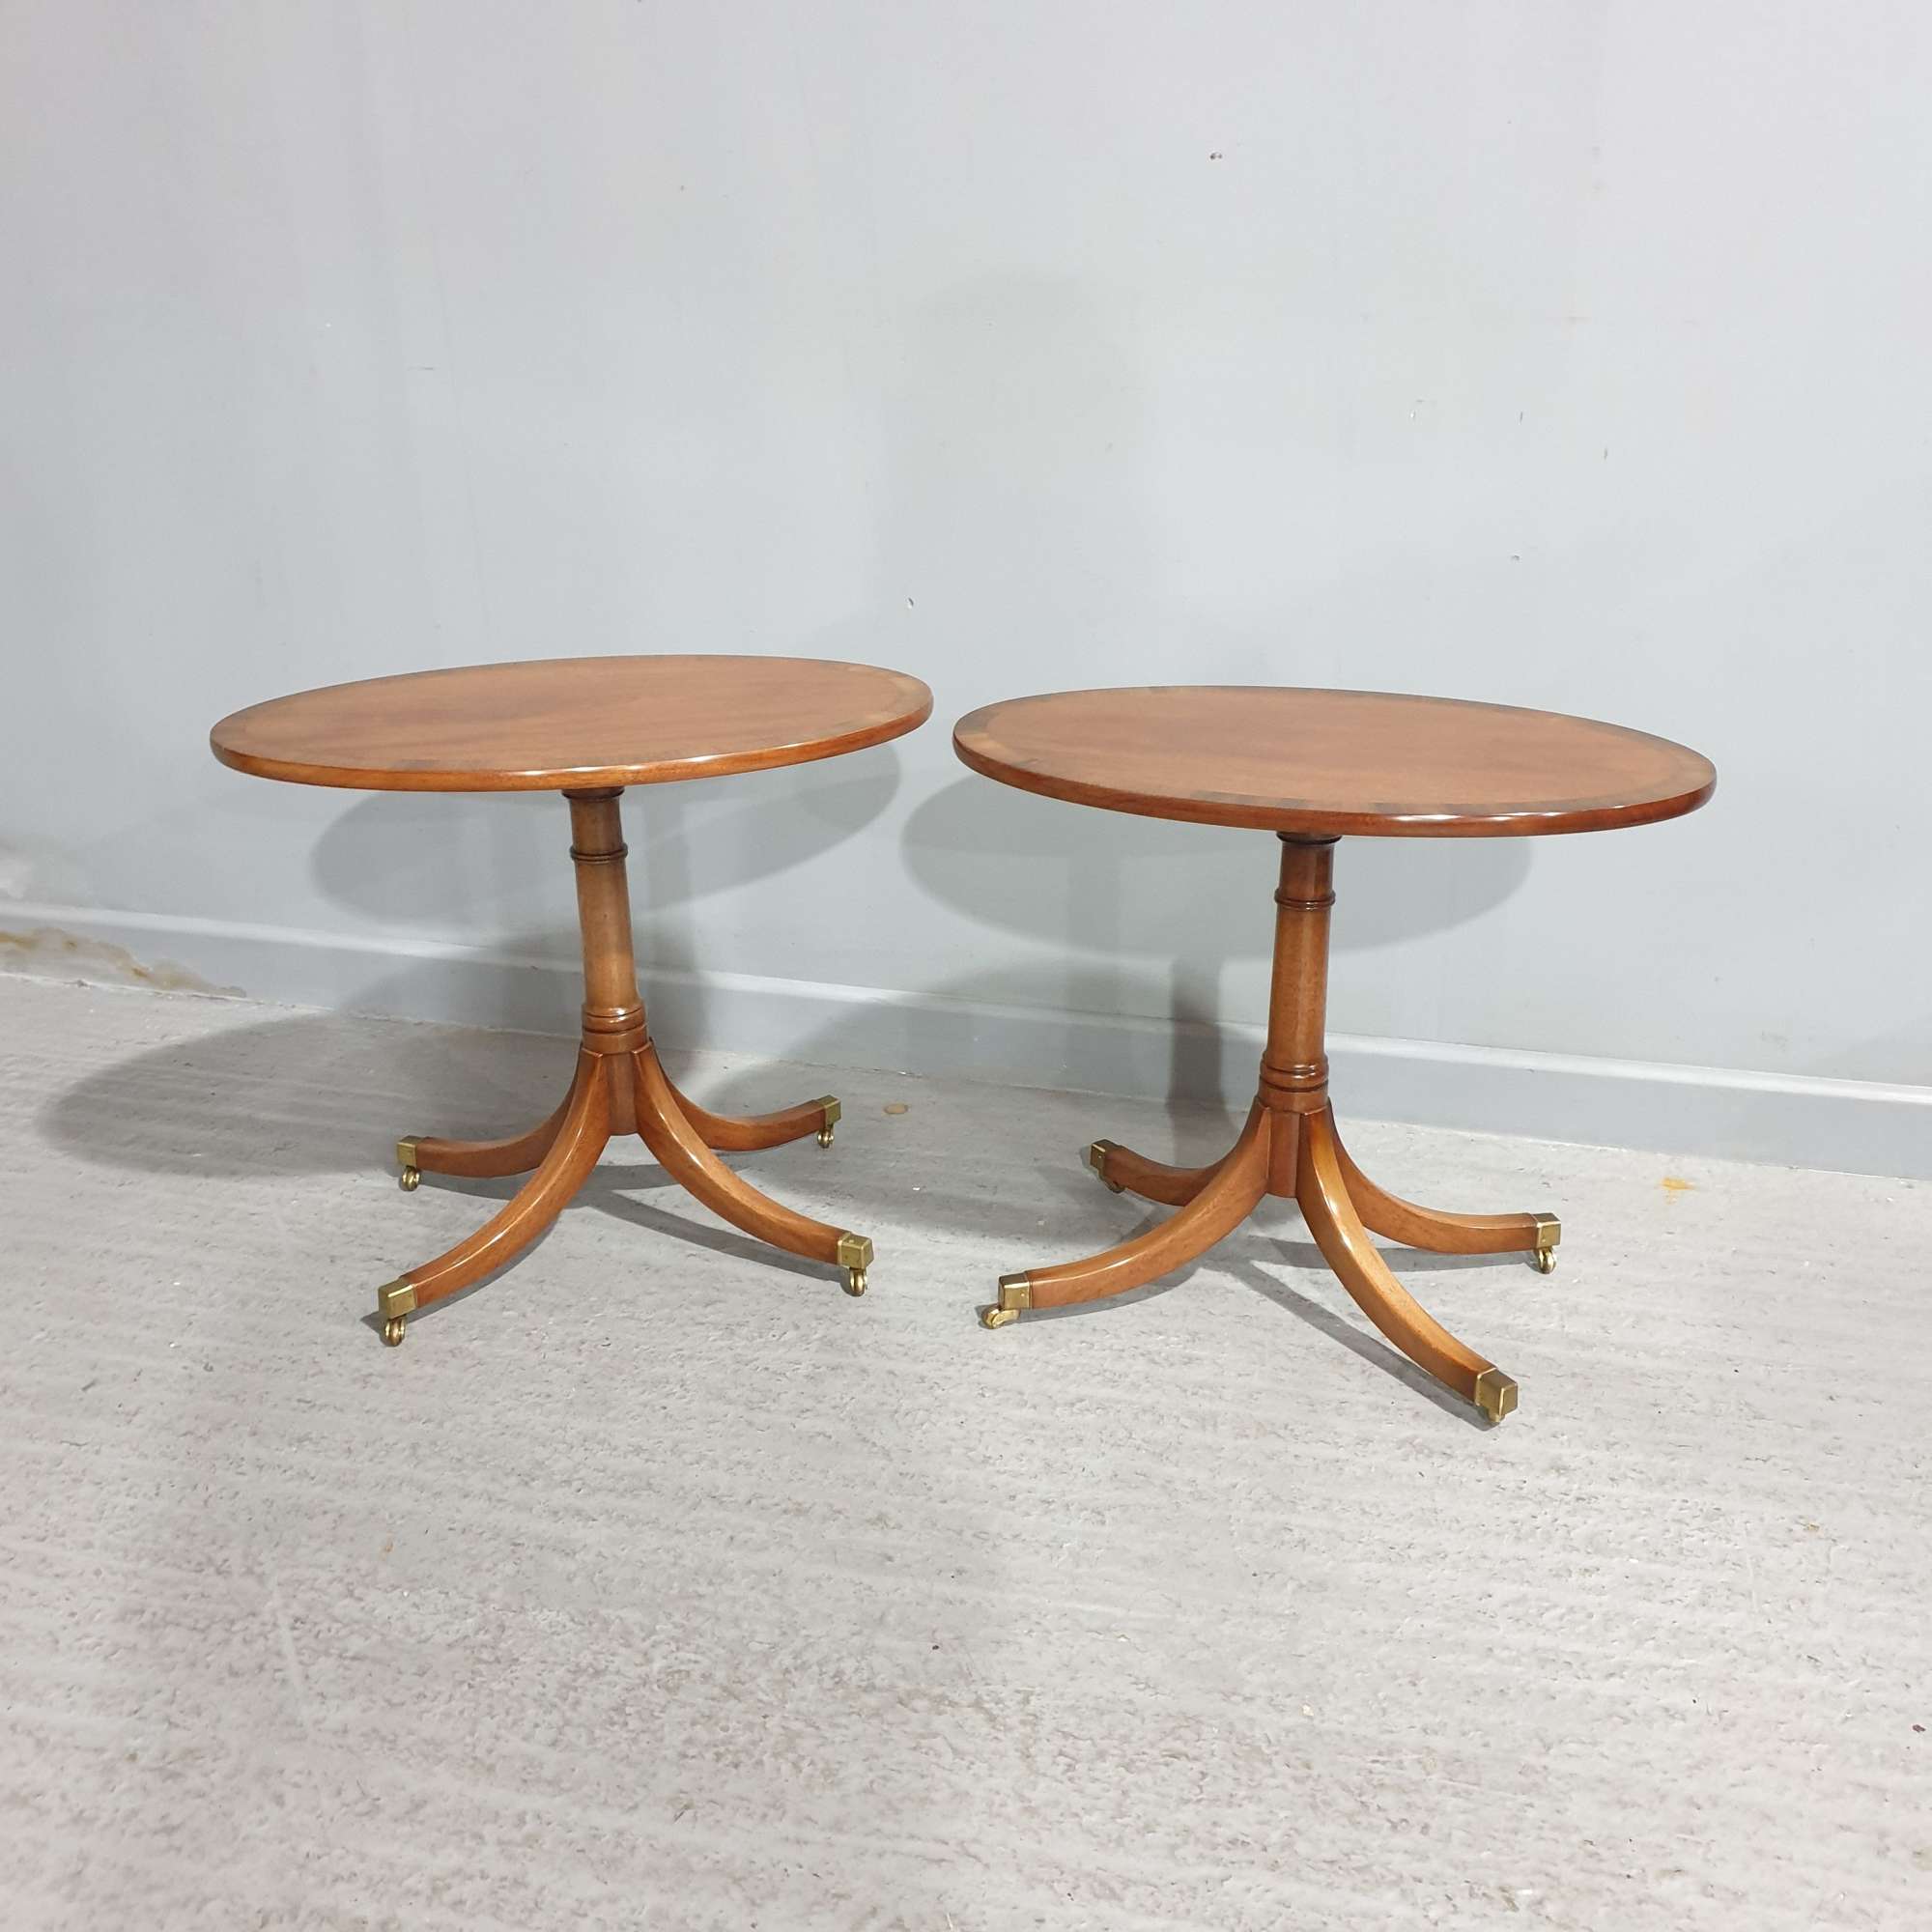 Excellent Quality Pair Mahogany Lamp Tables